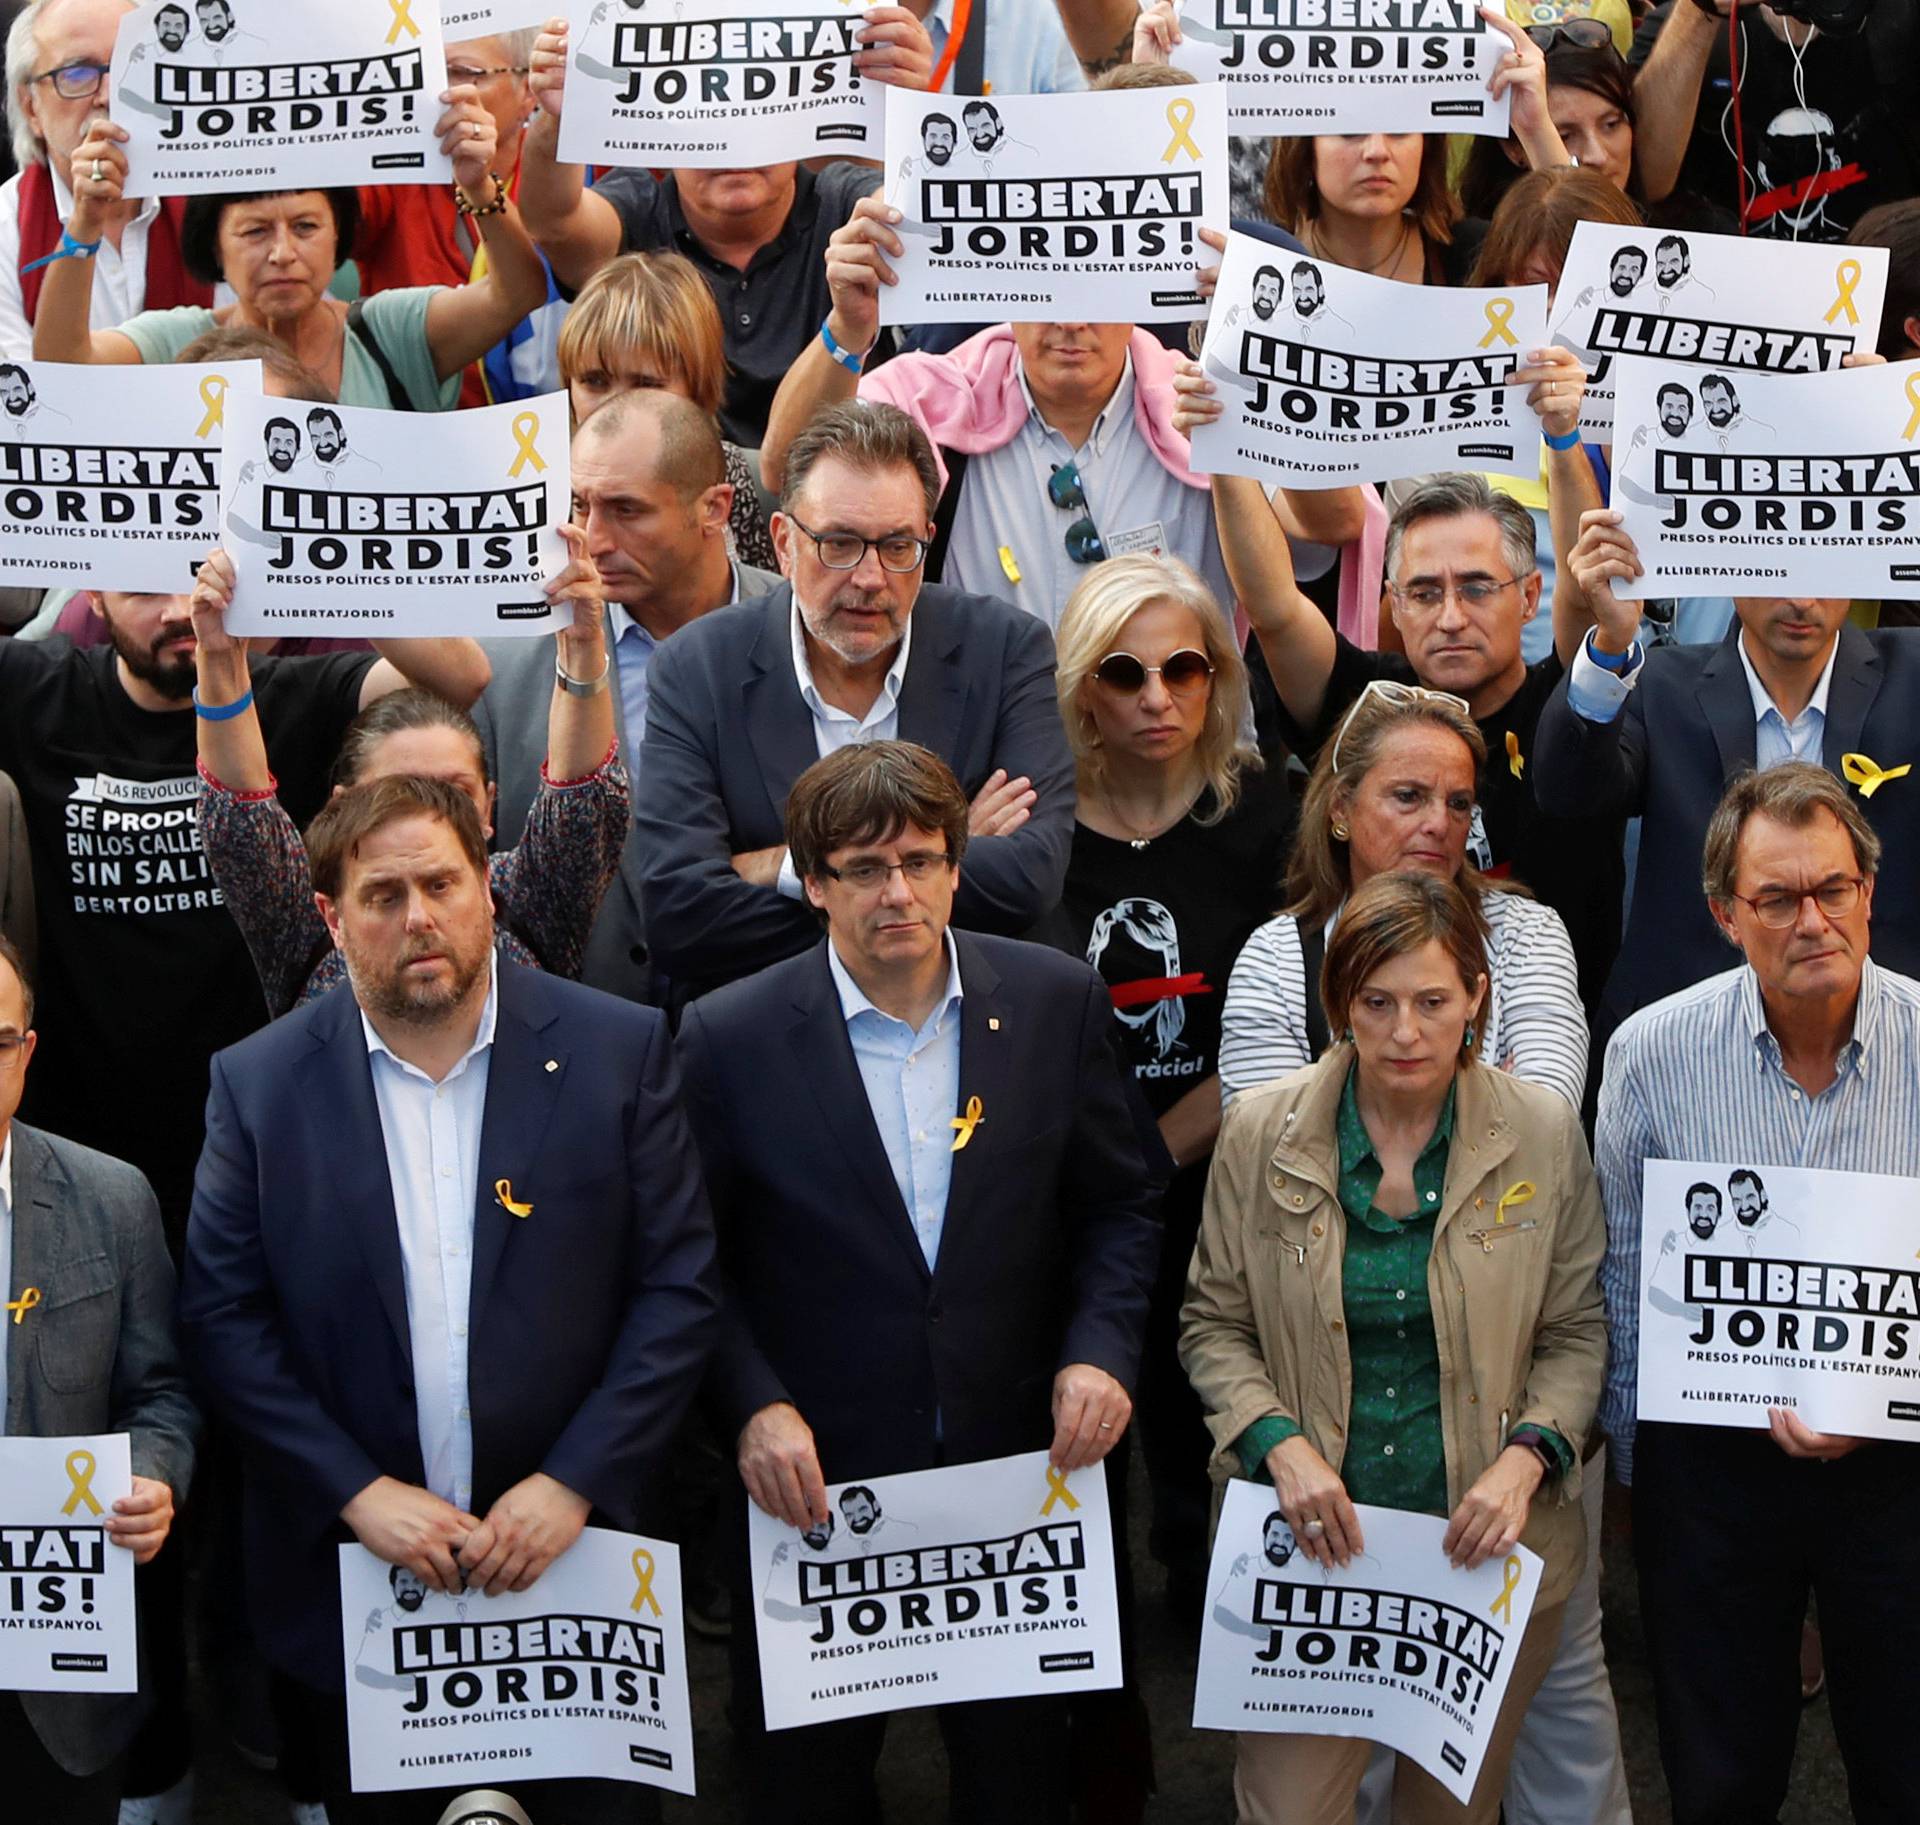 Catalan President Puigdemont and other government members attend a demonstration organised by Catalan pro-independence movements ANC (Catalan National Assembly) and Omnium Cutural, following the imprisonment of their two leaders in Barcelona